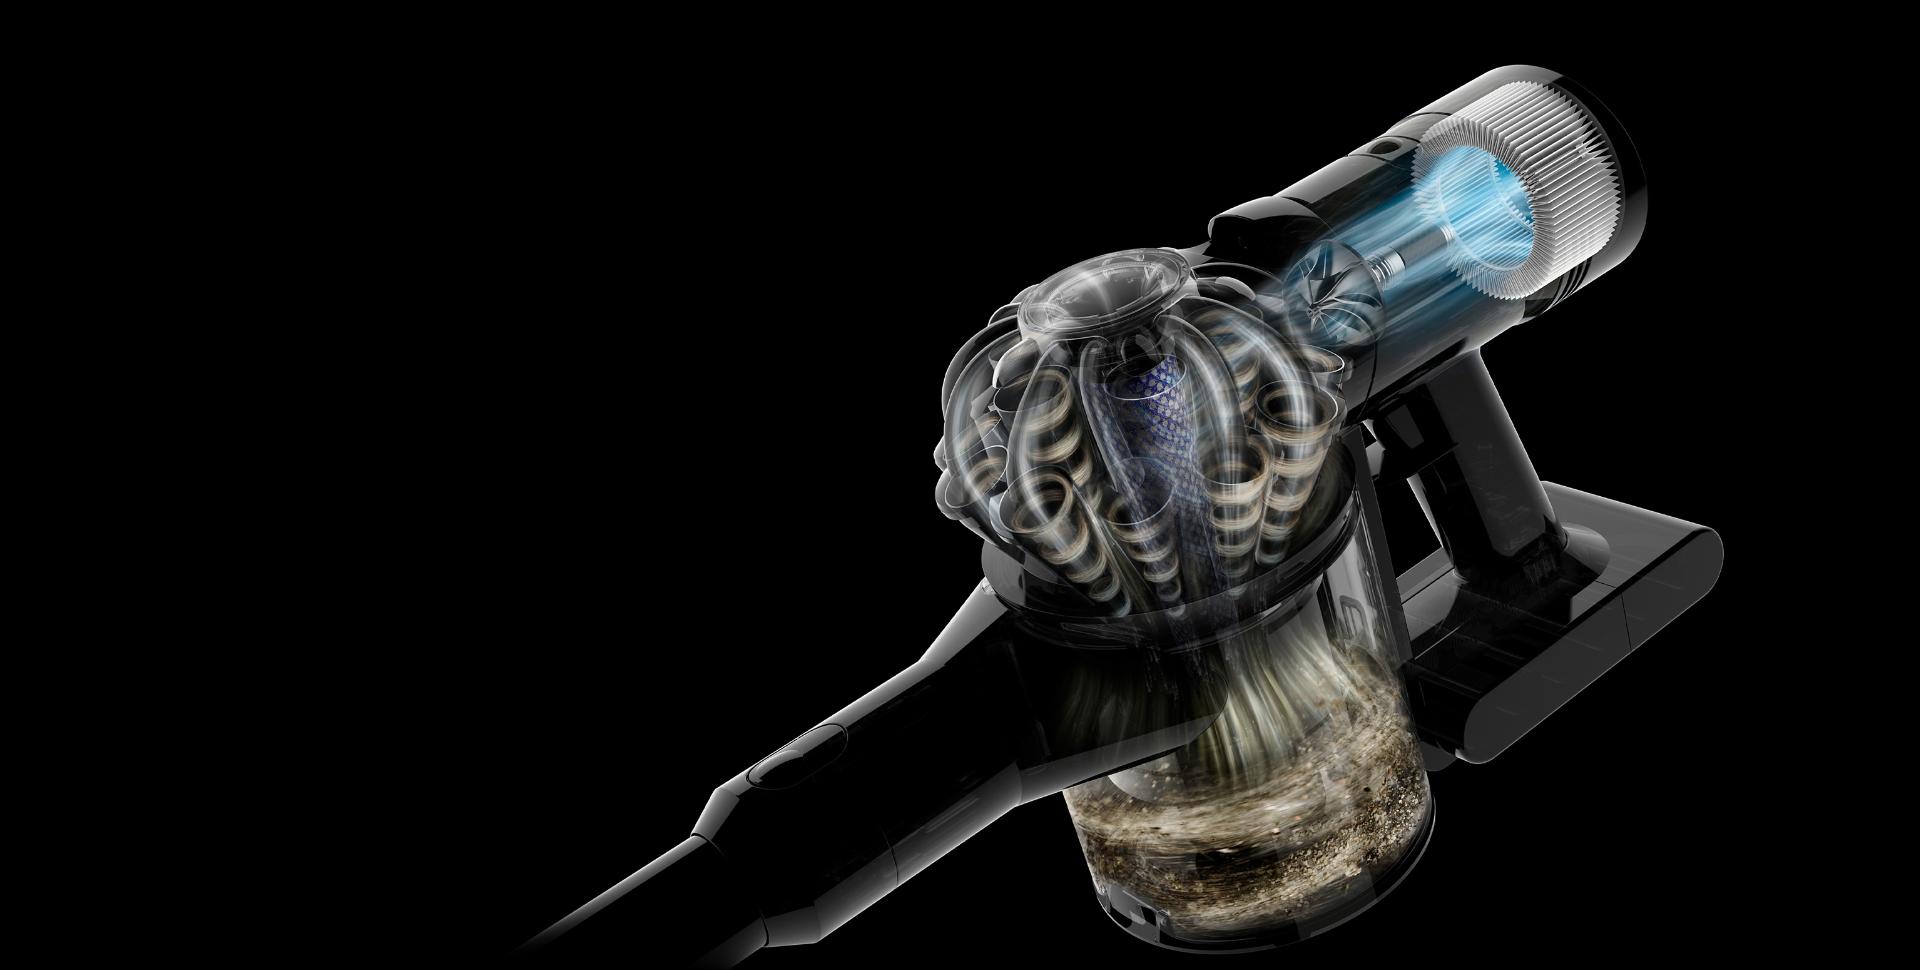 A cutaway of the Dyson V8 handheld, with blue illustrated airflow showing dust and debris moving through the machine to the back where clean air is expelled.